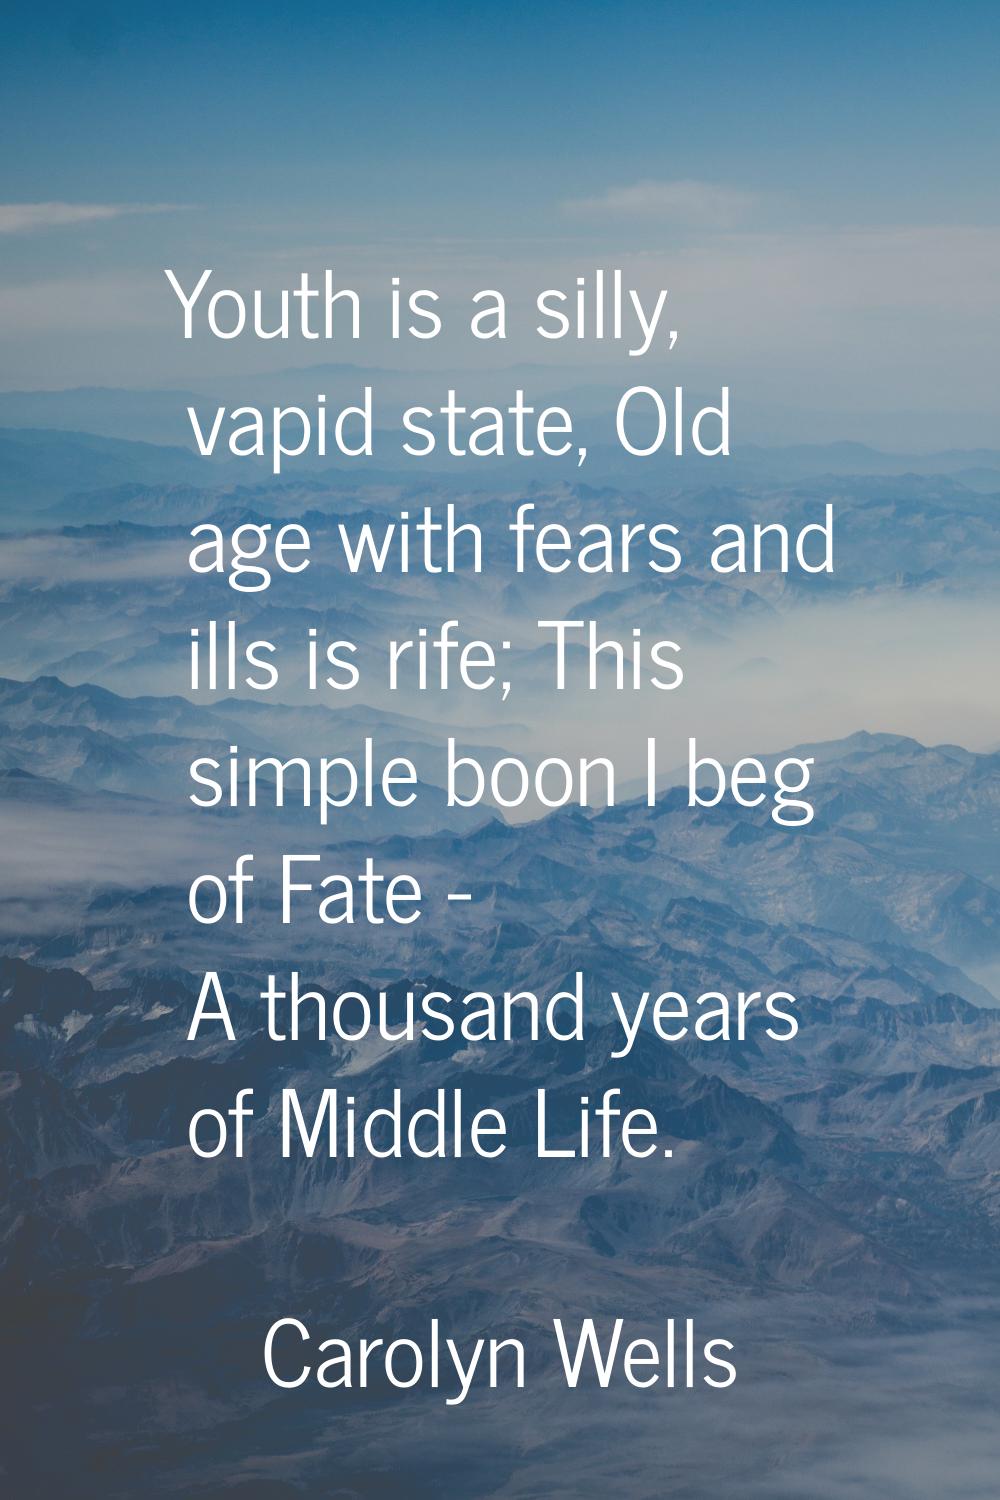 Youth is a silly, vapid state, Old age with fears and ills is rife; This simple boon I beg of Fate 